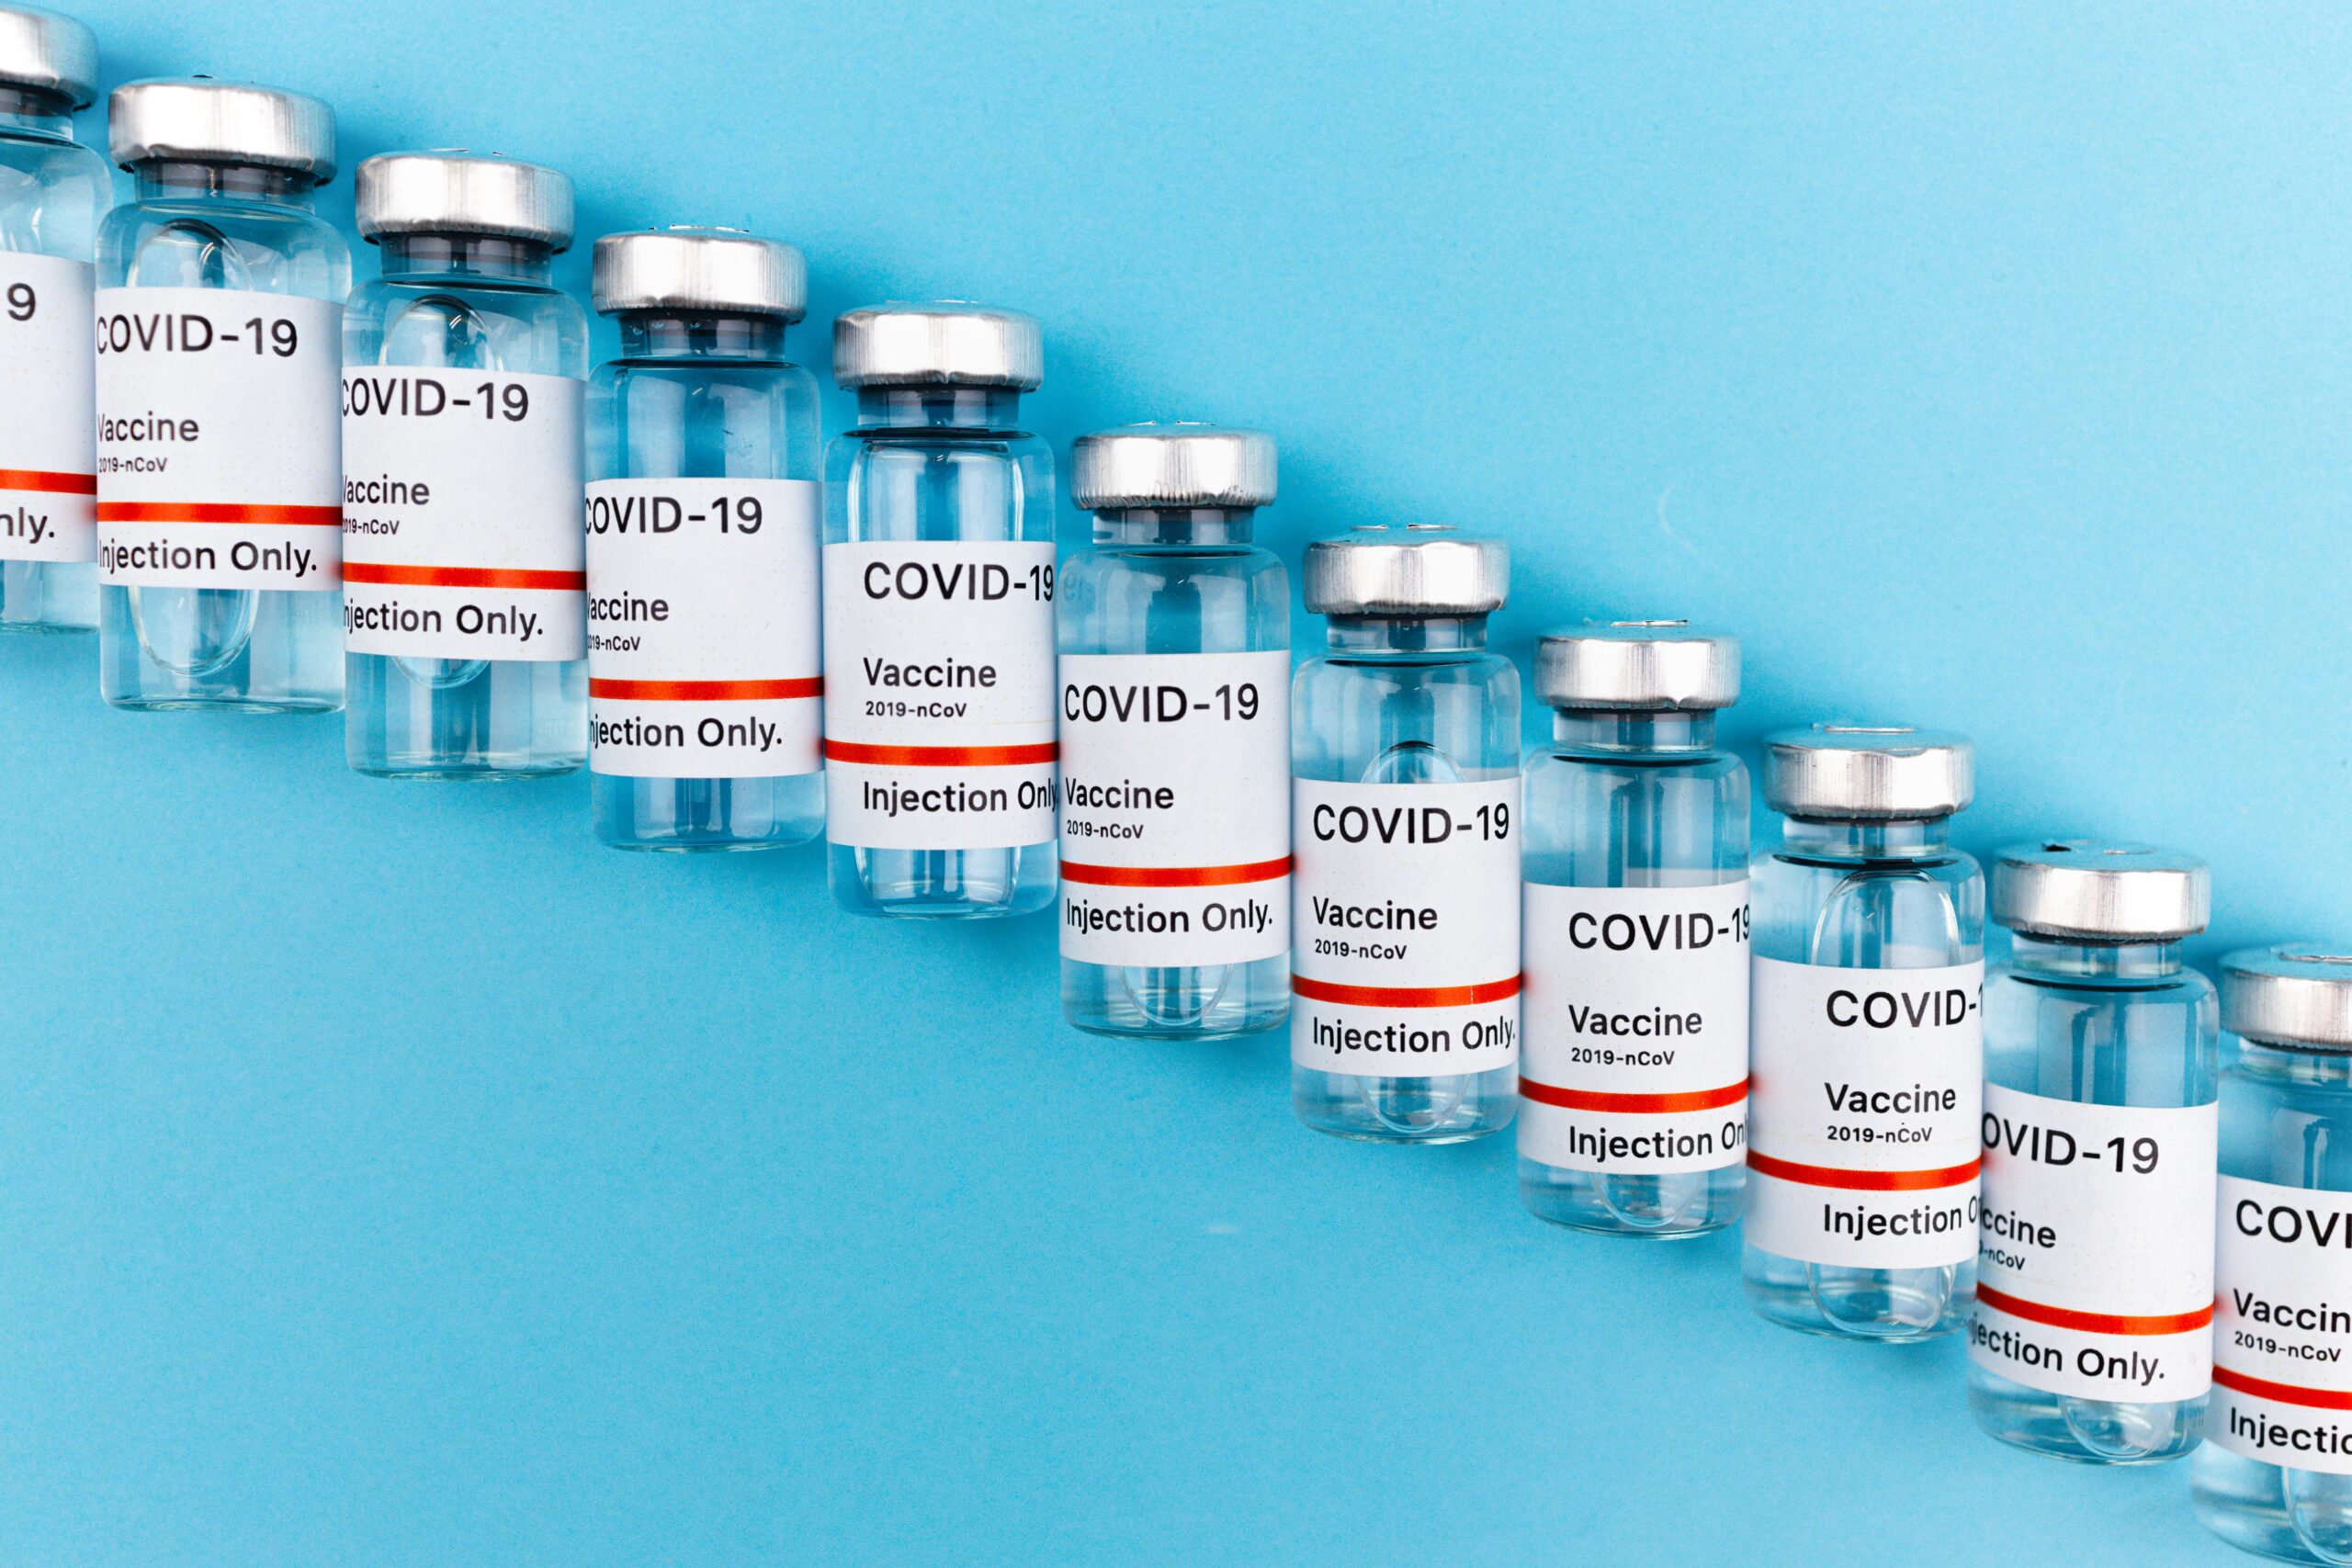 If you’re unsure about getting the COVID-19 vaccine, read this